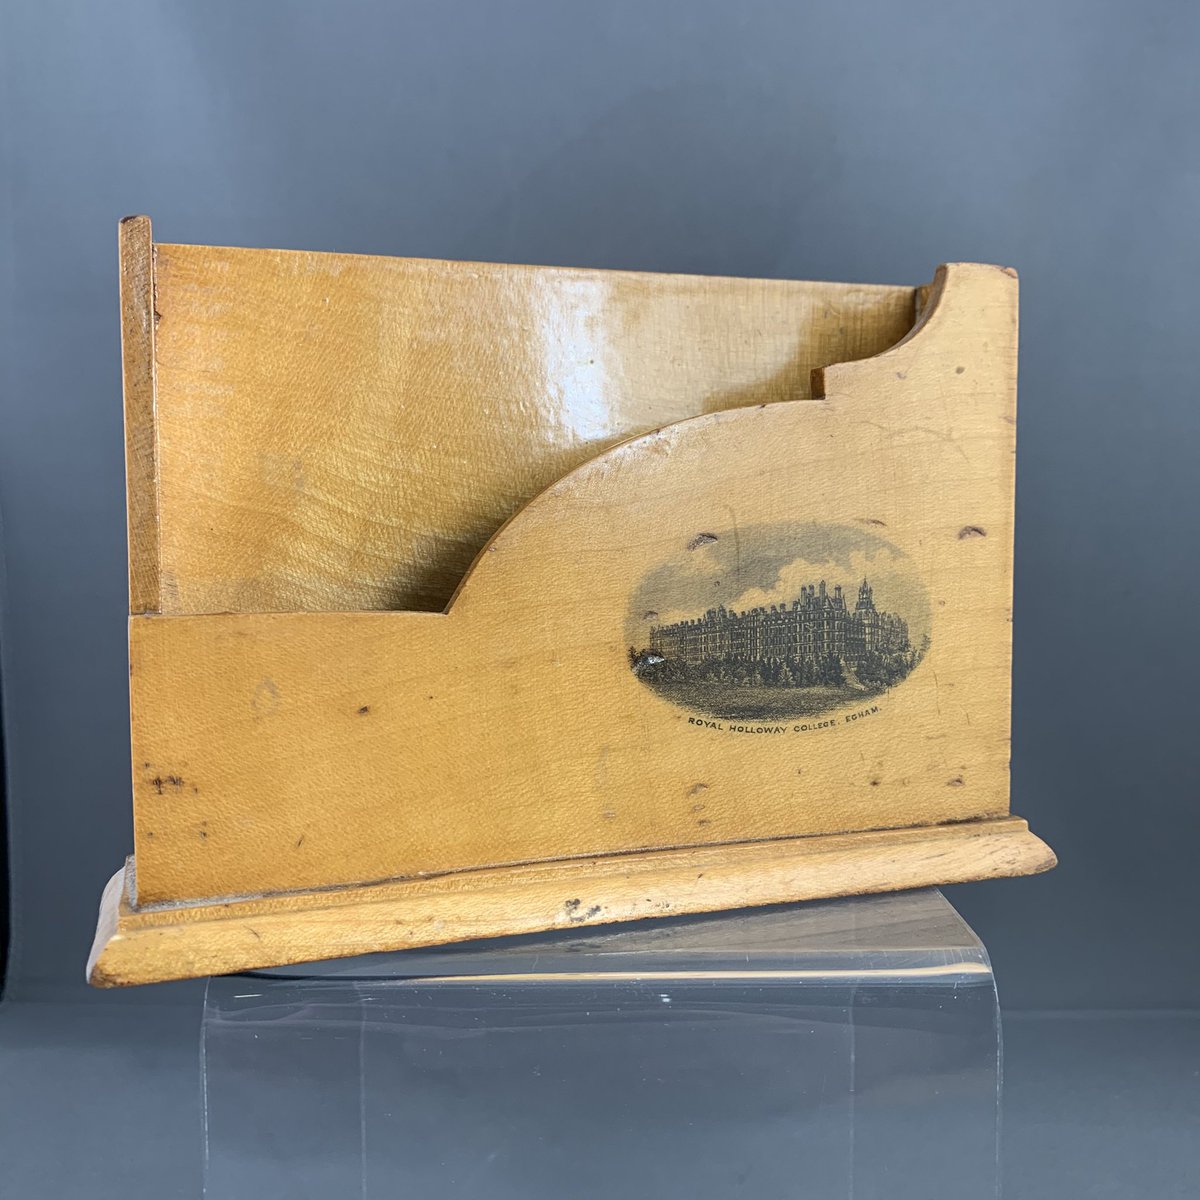 Next up: It’s a letter holder, featuring print of Royal Holloway, University of London on right hand corner. Date of manufacture unknown.But is it a part of our collection?